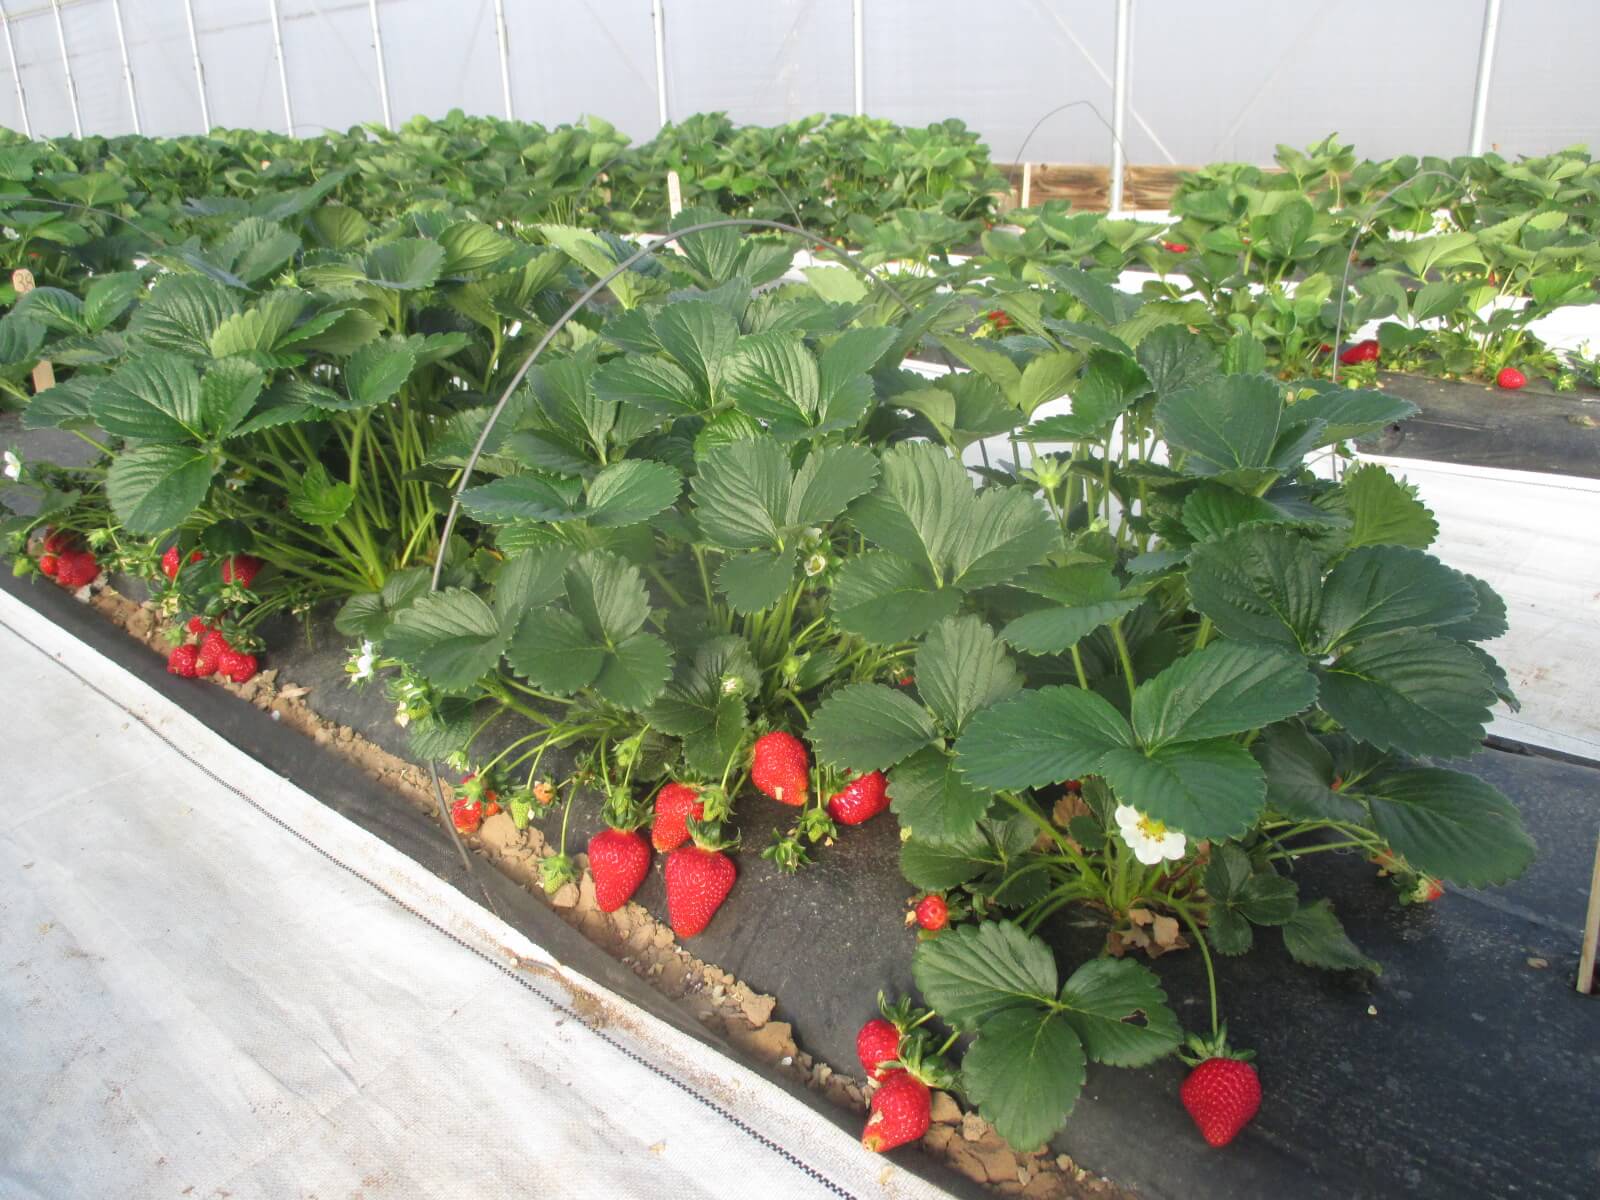 Strawberries growing in a high tunnel production system.